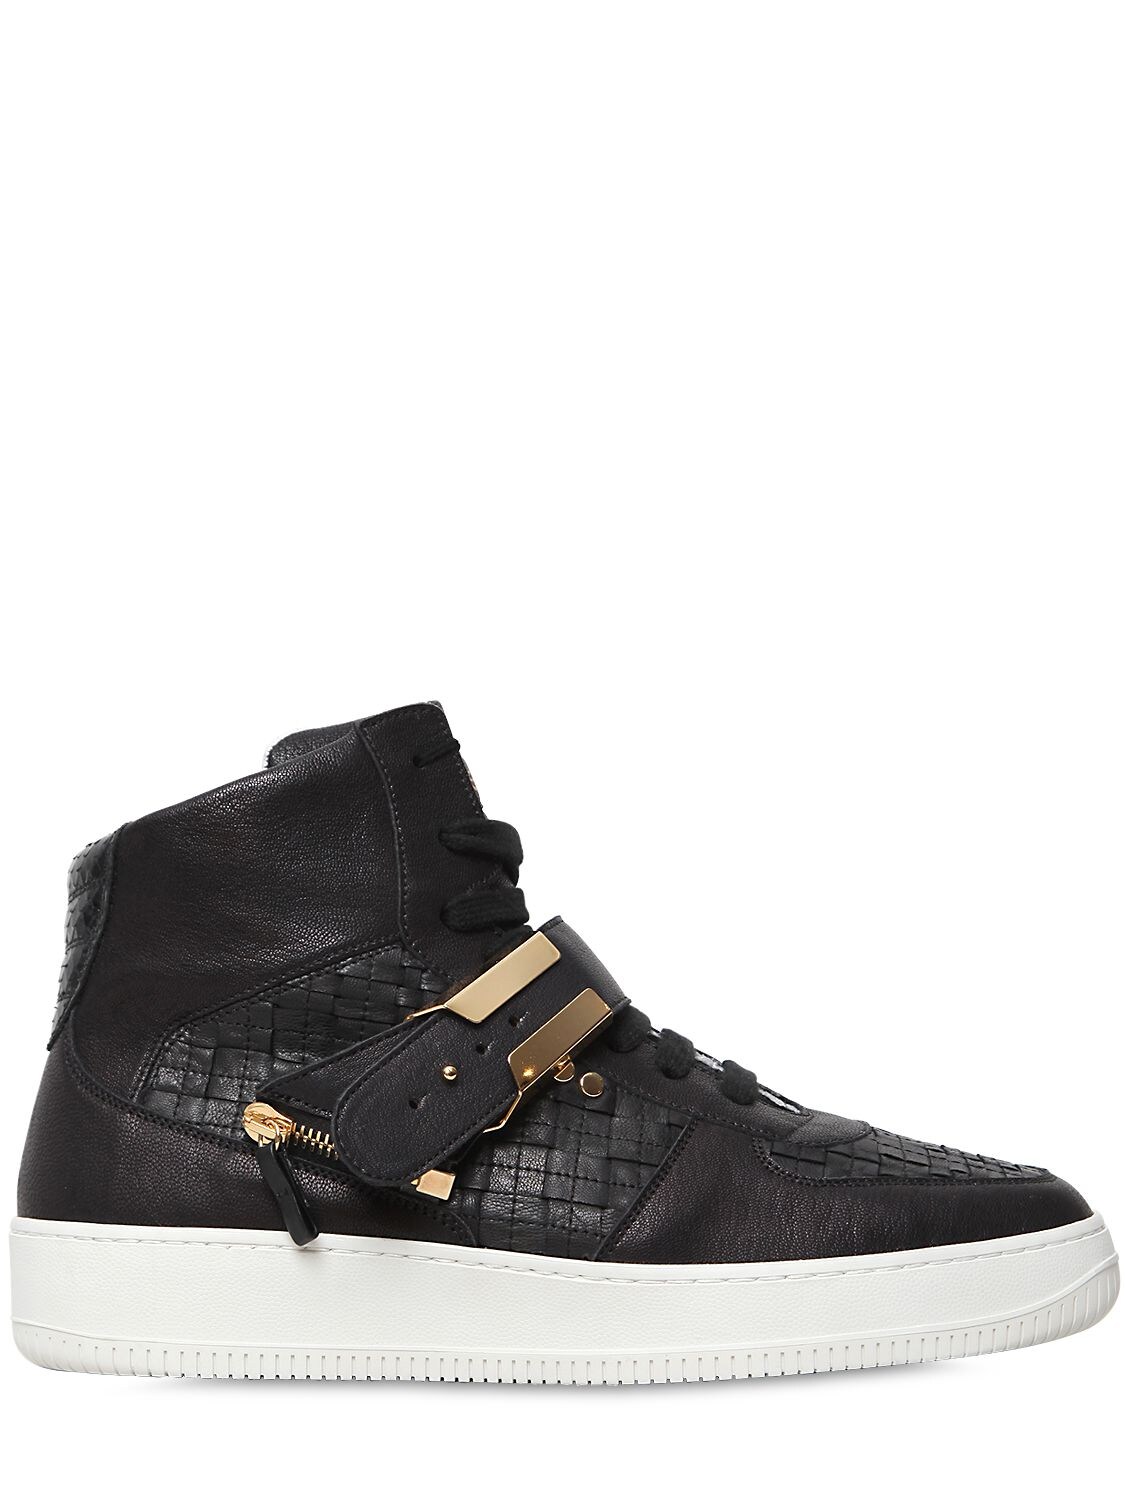 D-s!de Woven Leather High Top Sneakers In Black/white